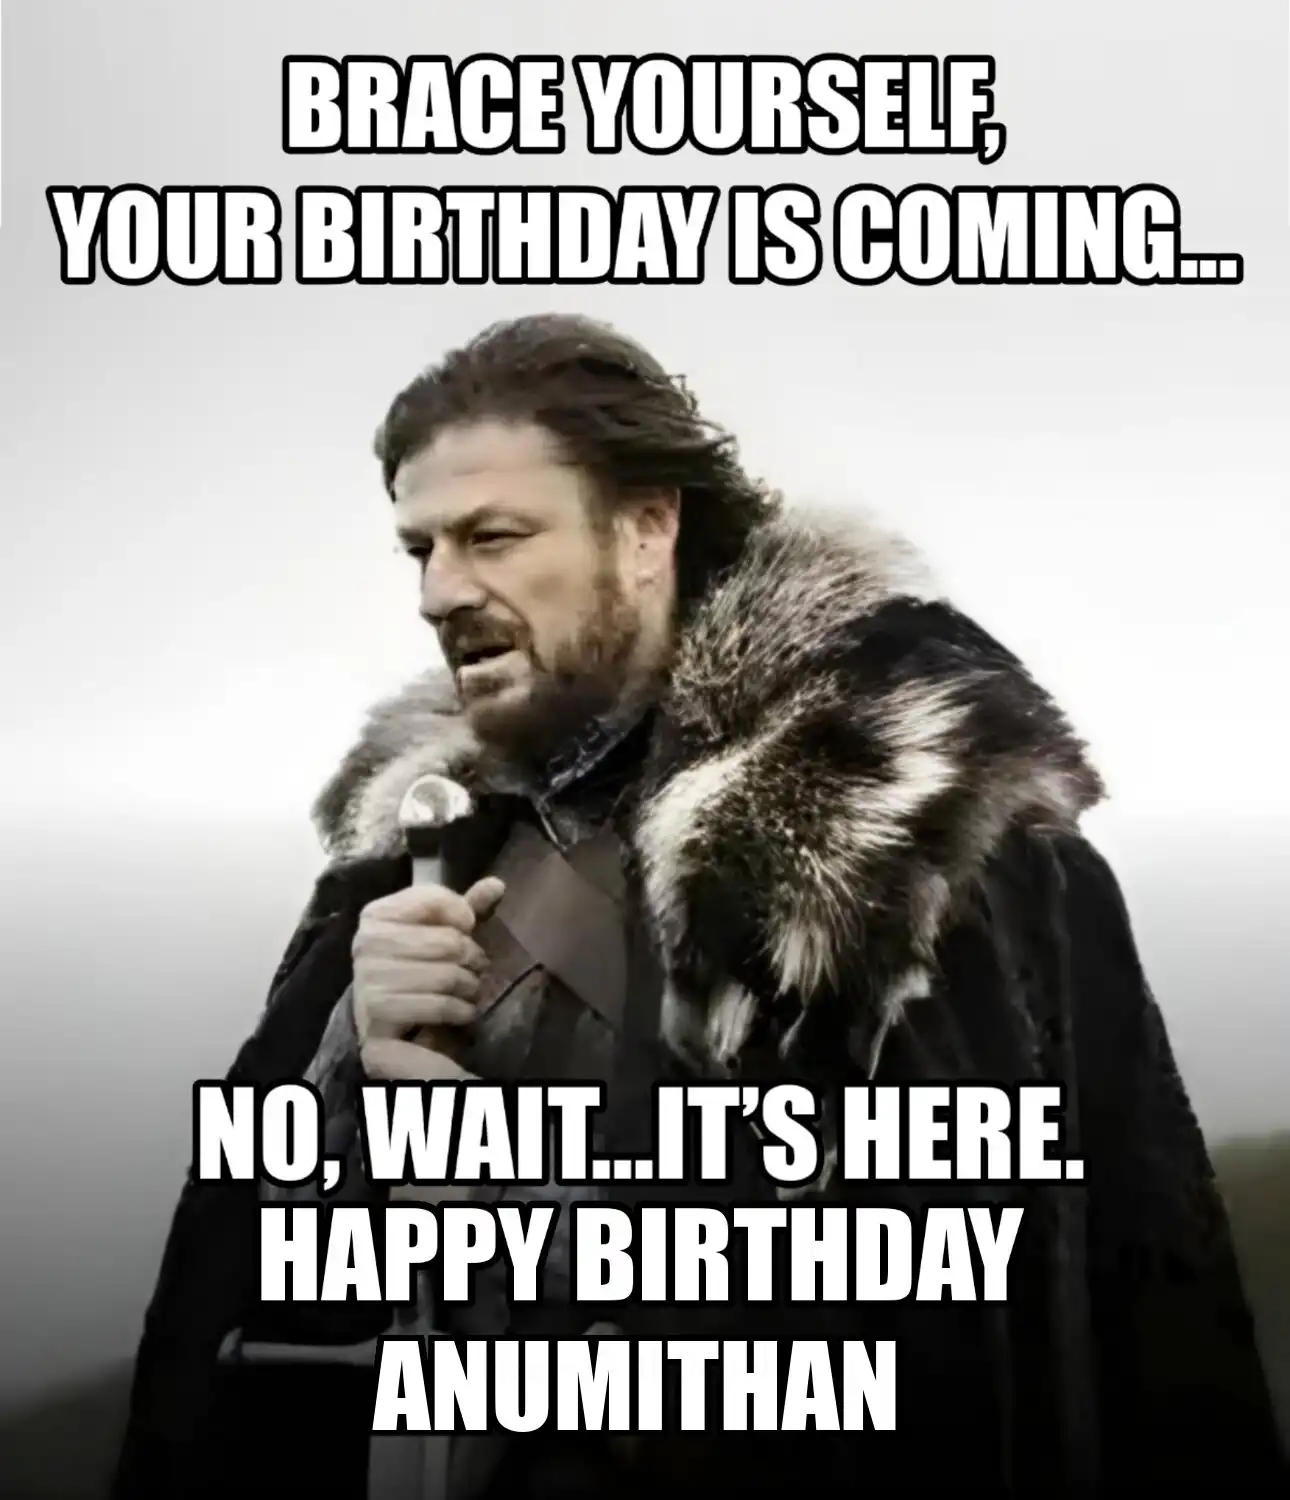 Happy Birthday Anumithan Brace Yourself Your Birthday Is Coming Meme